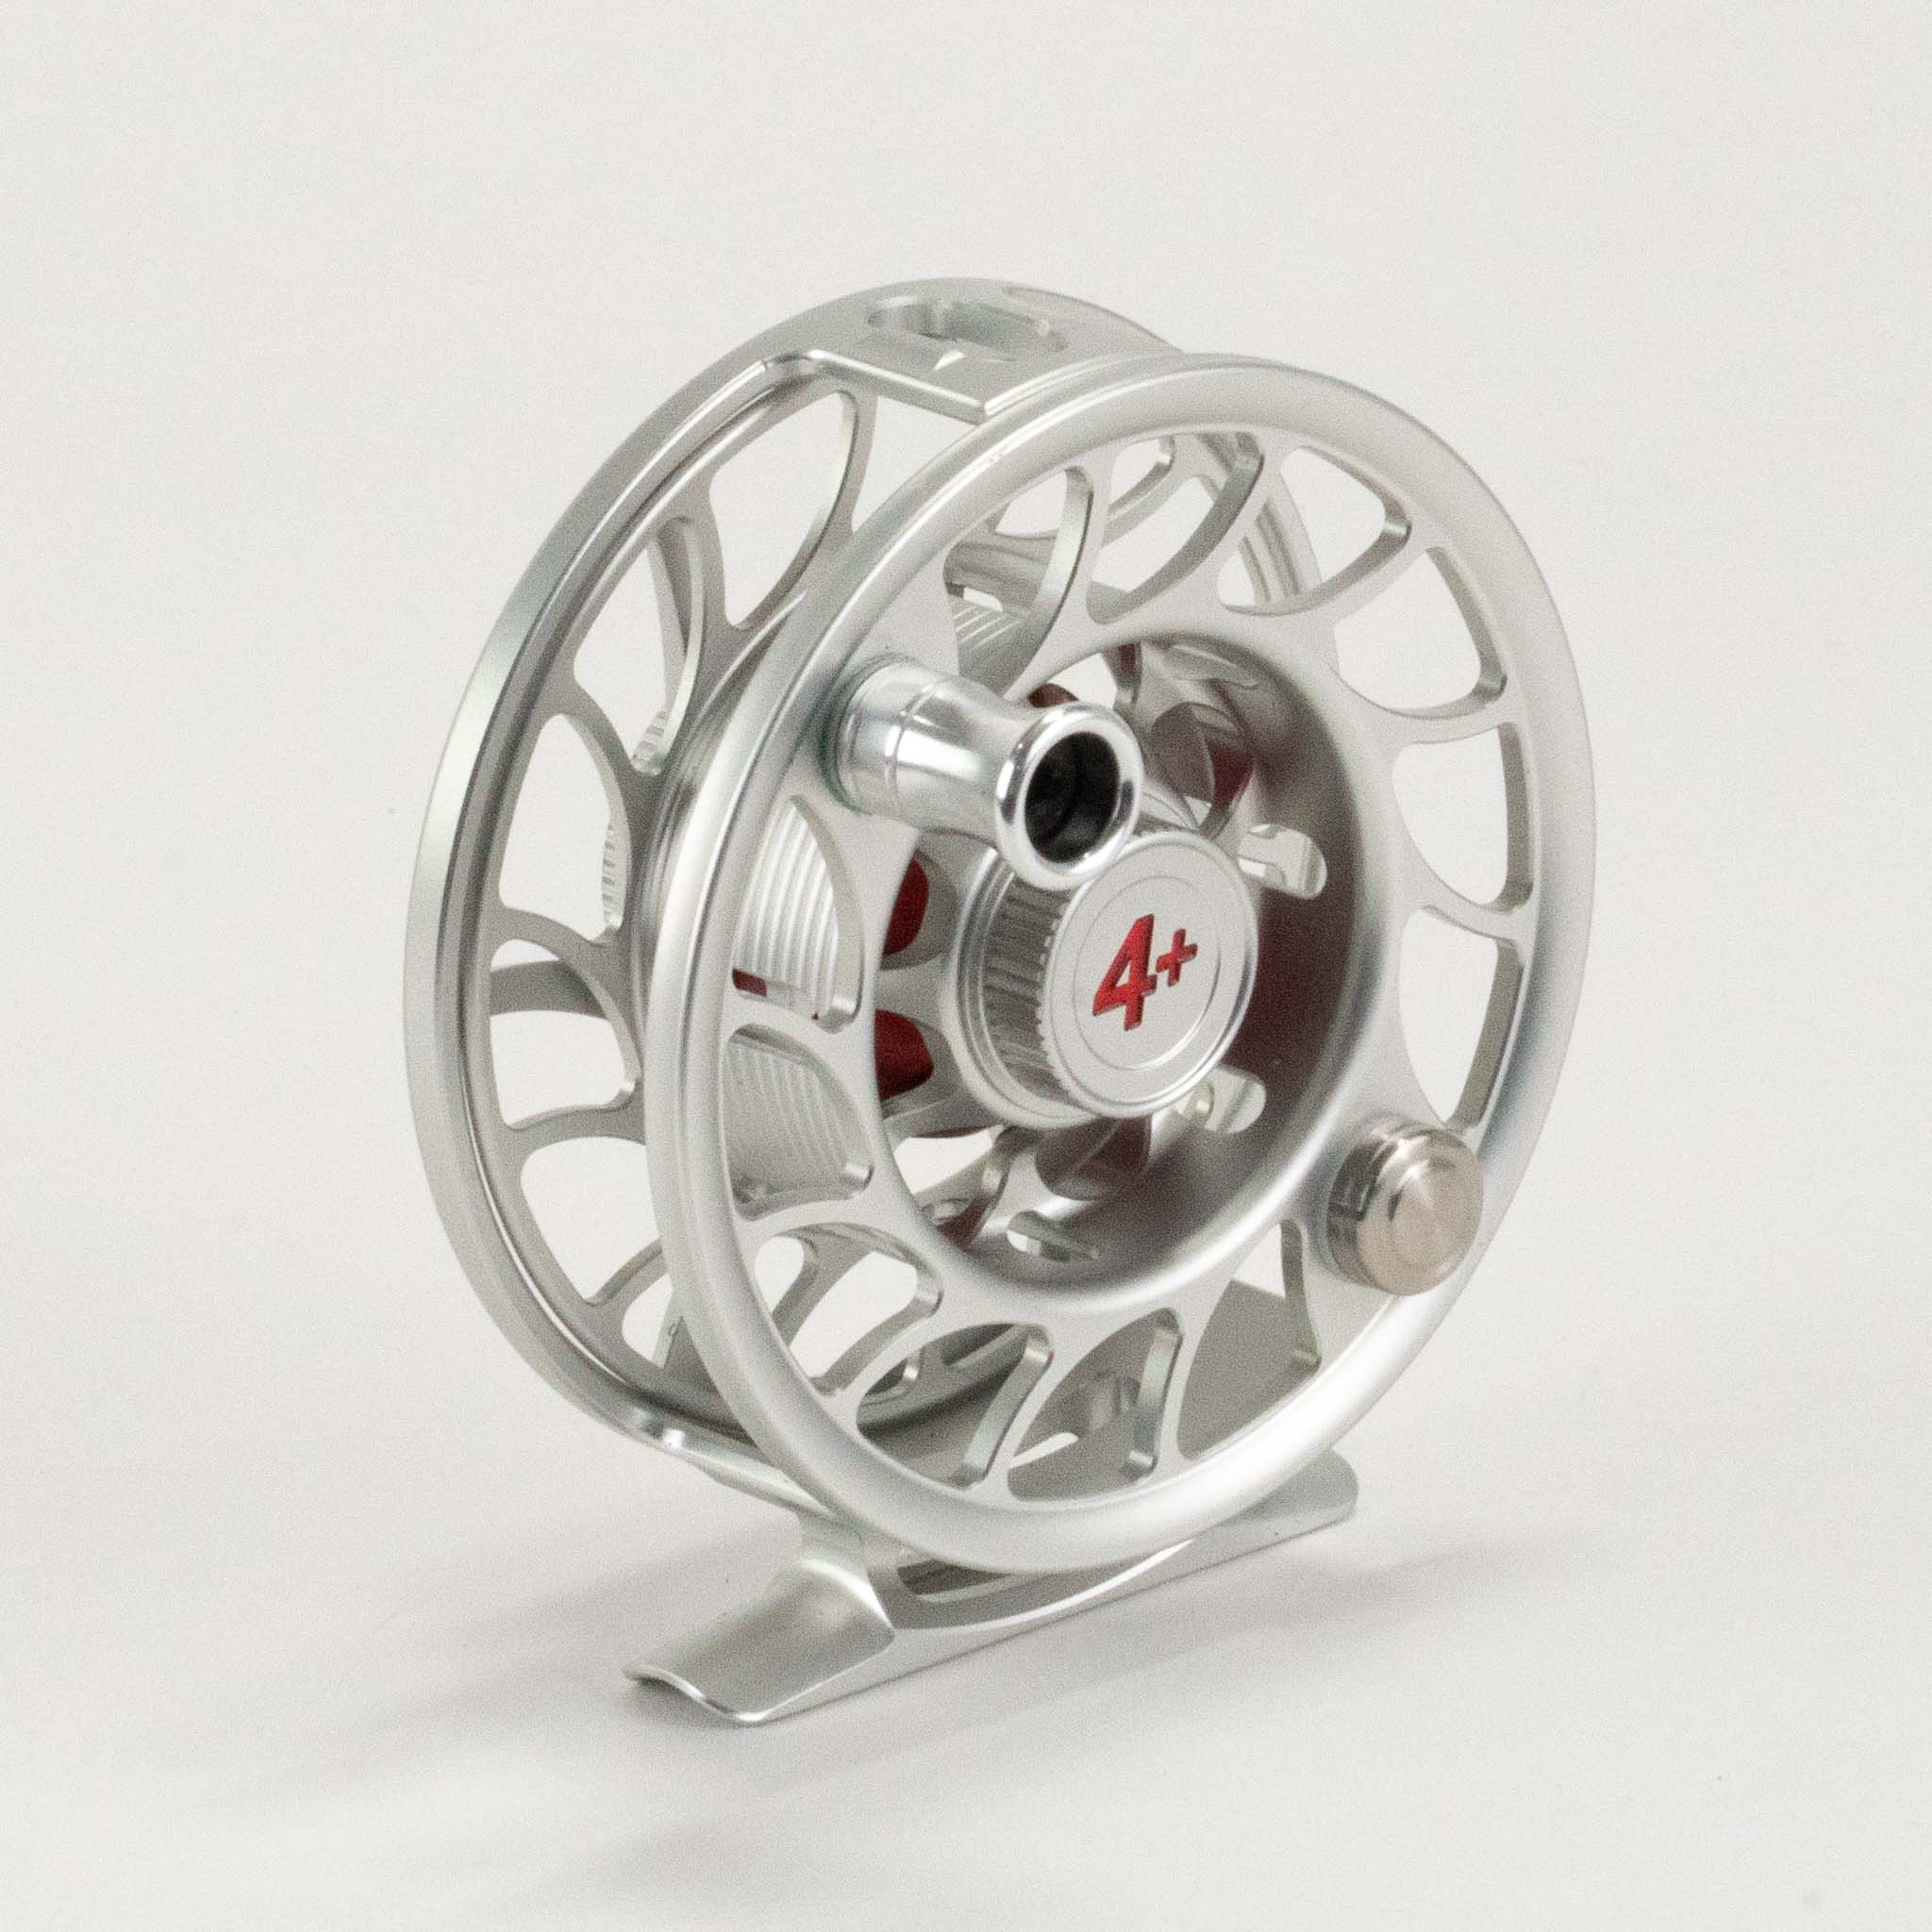 Hatch Iconic 4 plus fly reel